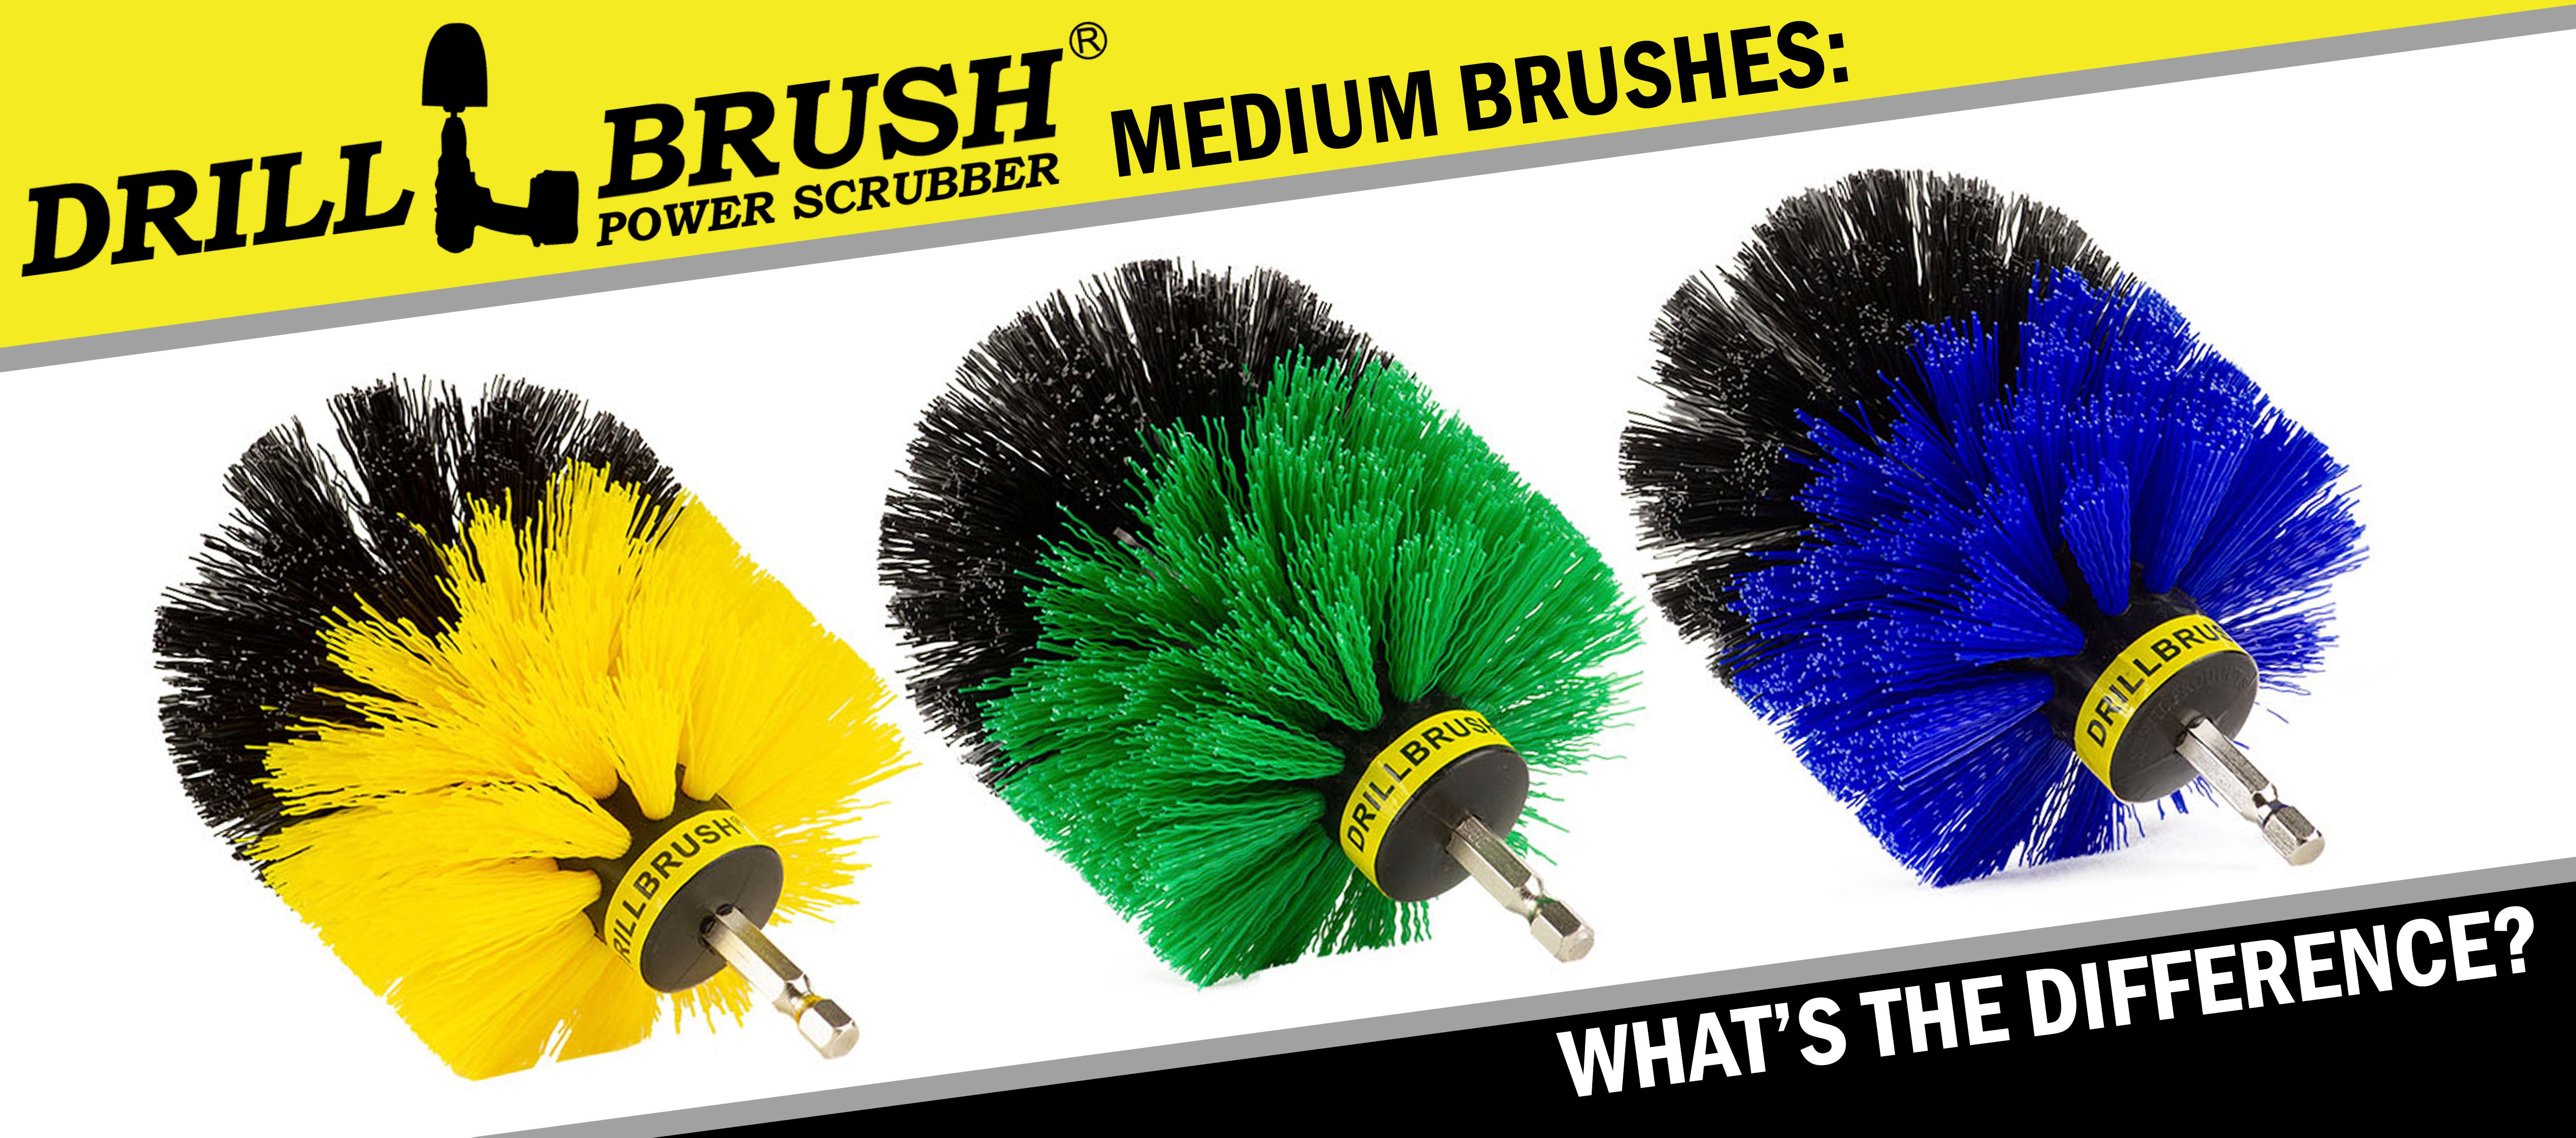 What’s the Difference Between the Drillbrush Yellow, Green, and Blue Medium Brushes?